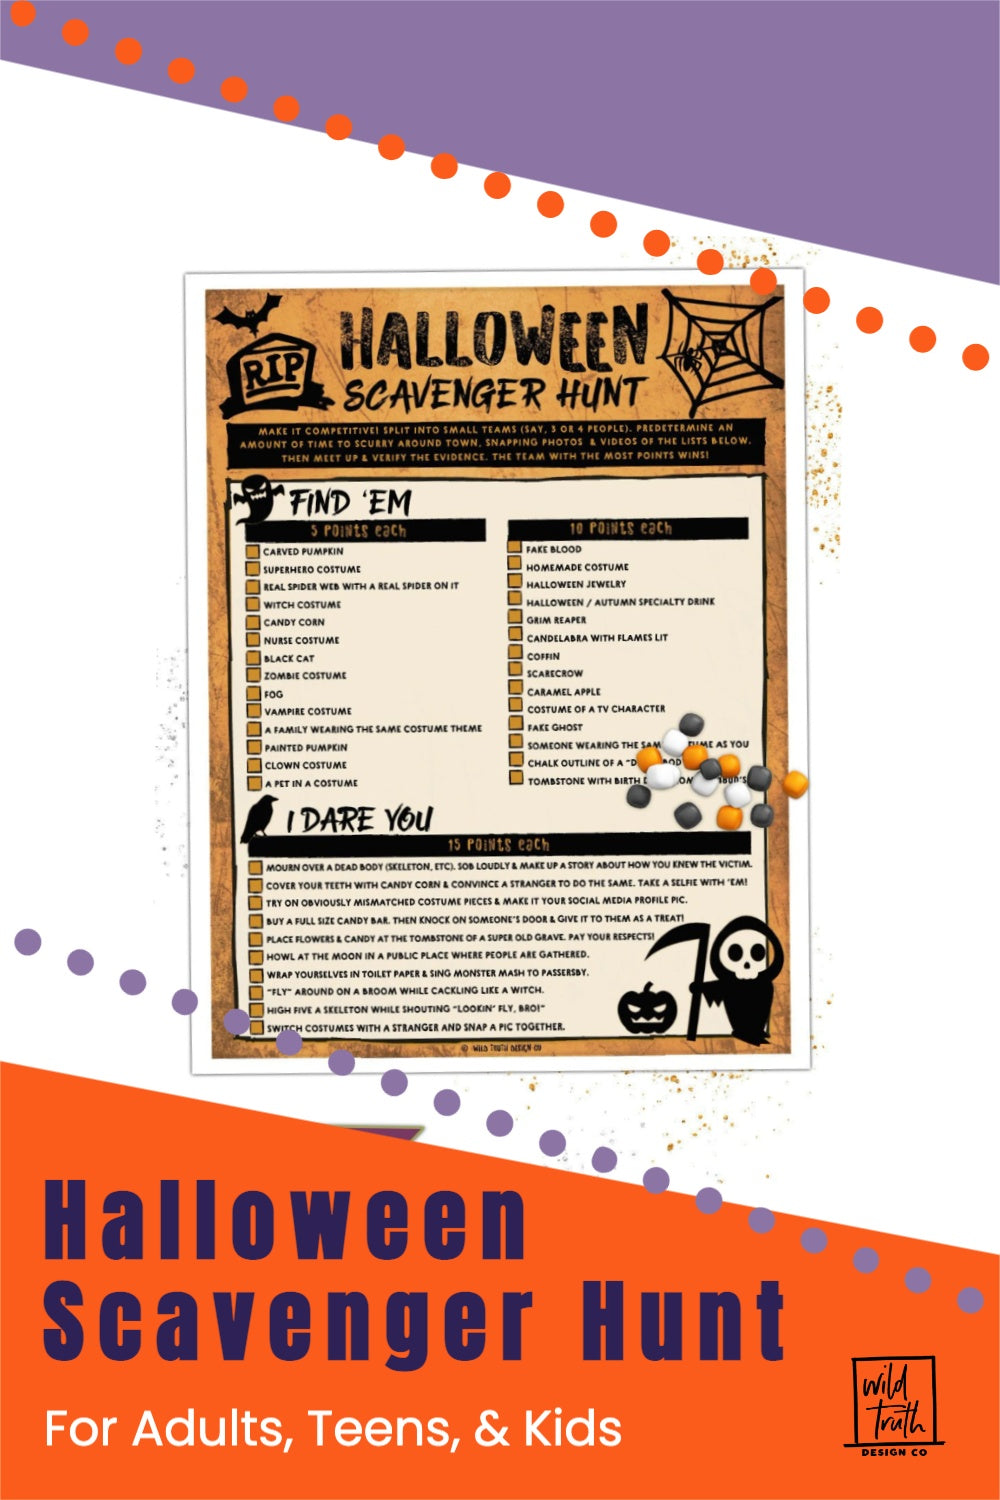 Outdoor Halloween Scavenger Hunt For Teens & Young Adults